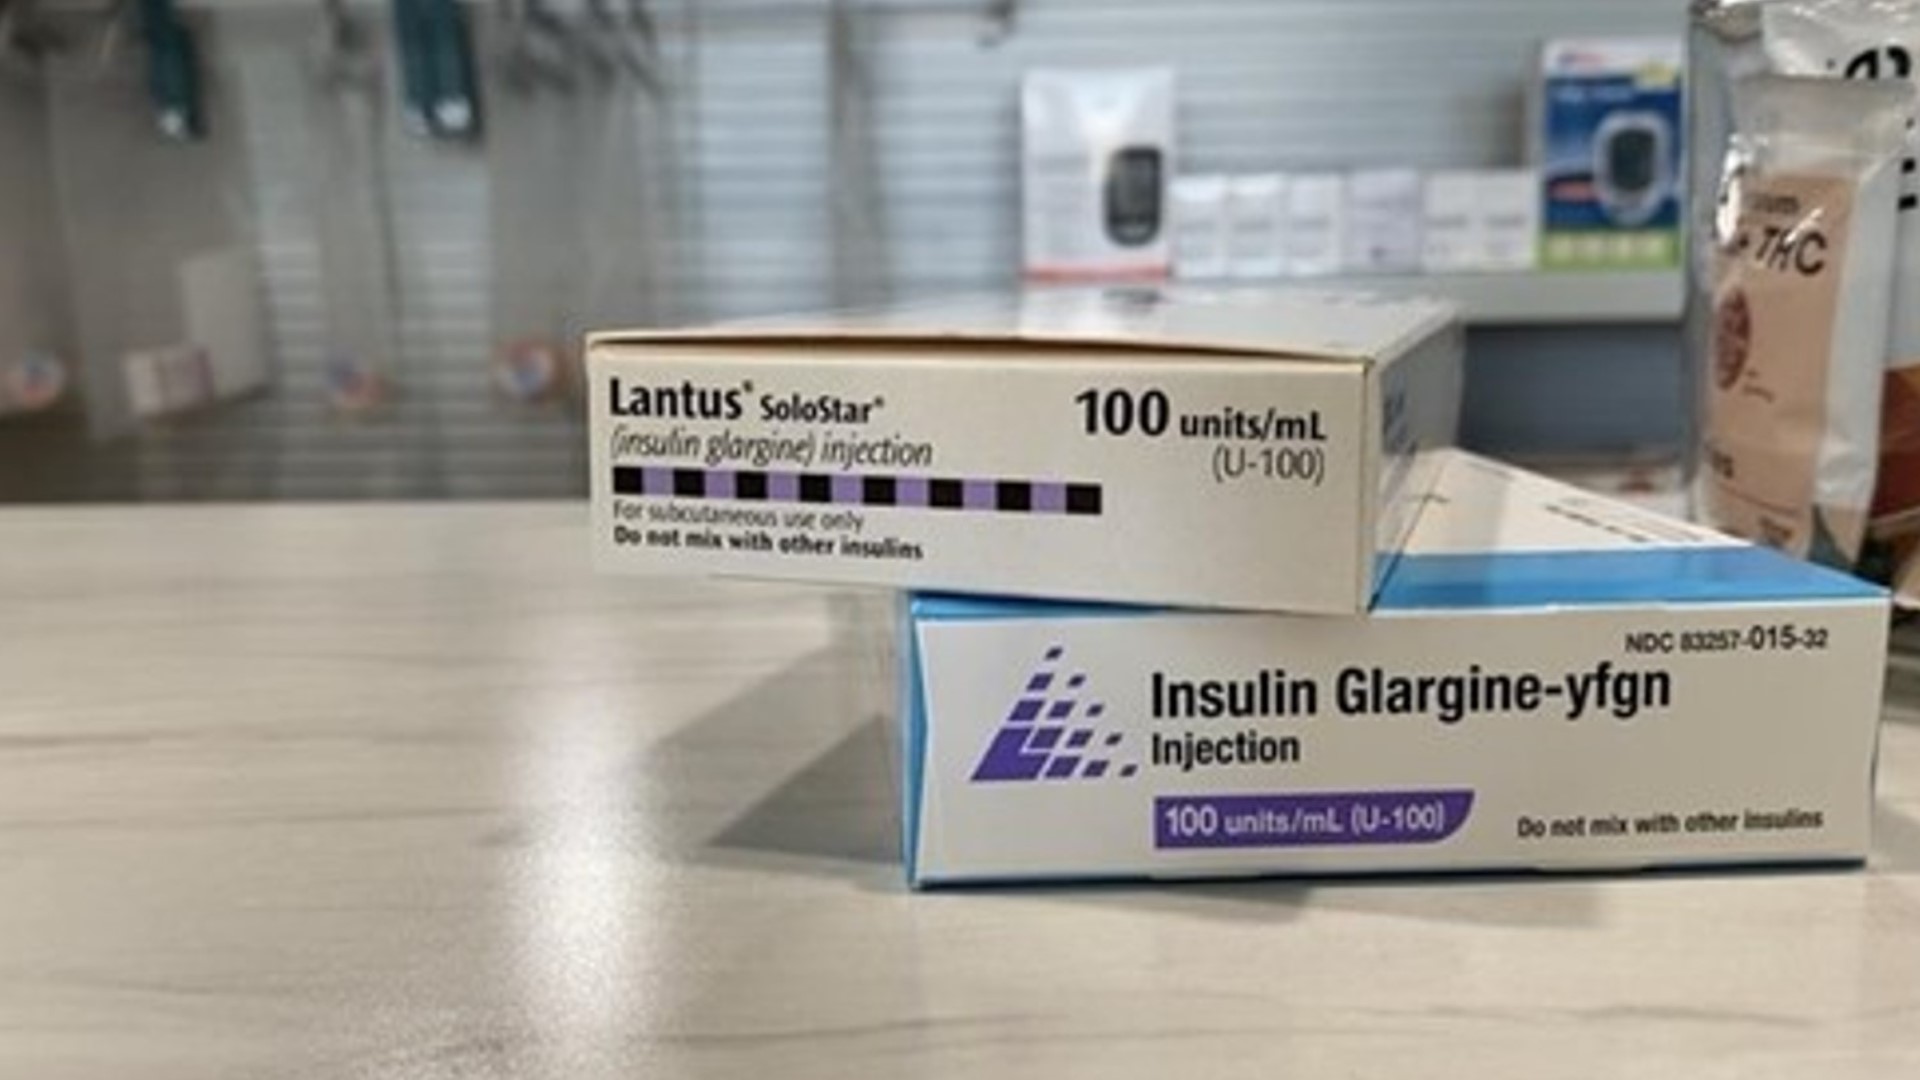 A price cut from multiple insulin manufacturers went into effect last month as access to life-saving medicine has been a challenge for diabetics the past few years.